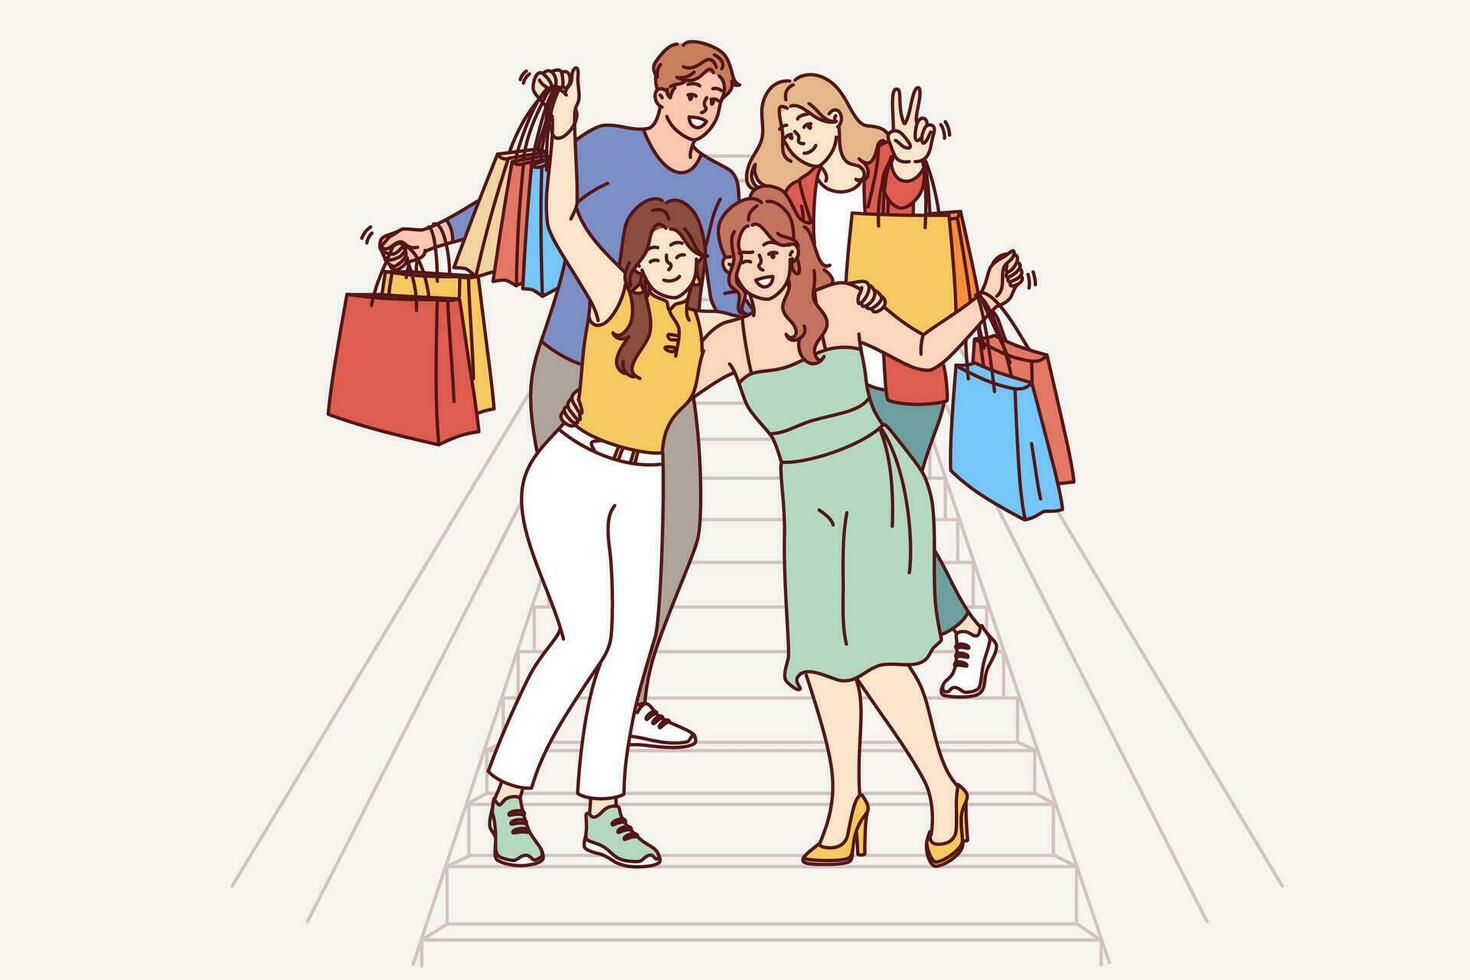 Group of shopaholics, mall buyers with multi-colored paper bags are standing on stairs, rejoicing at big discounts. Men and women shopaholics go to boutiques together and buy fashionable clothes vector